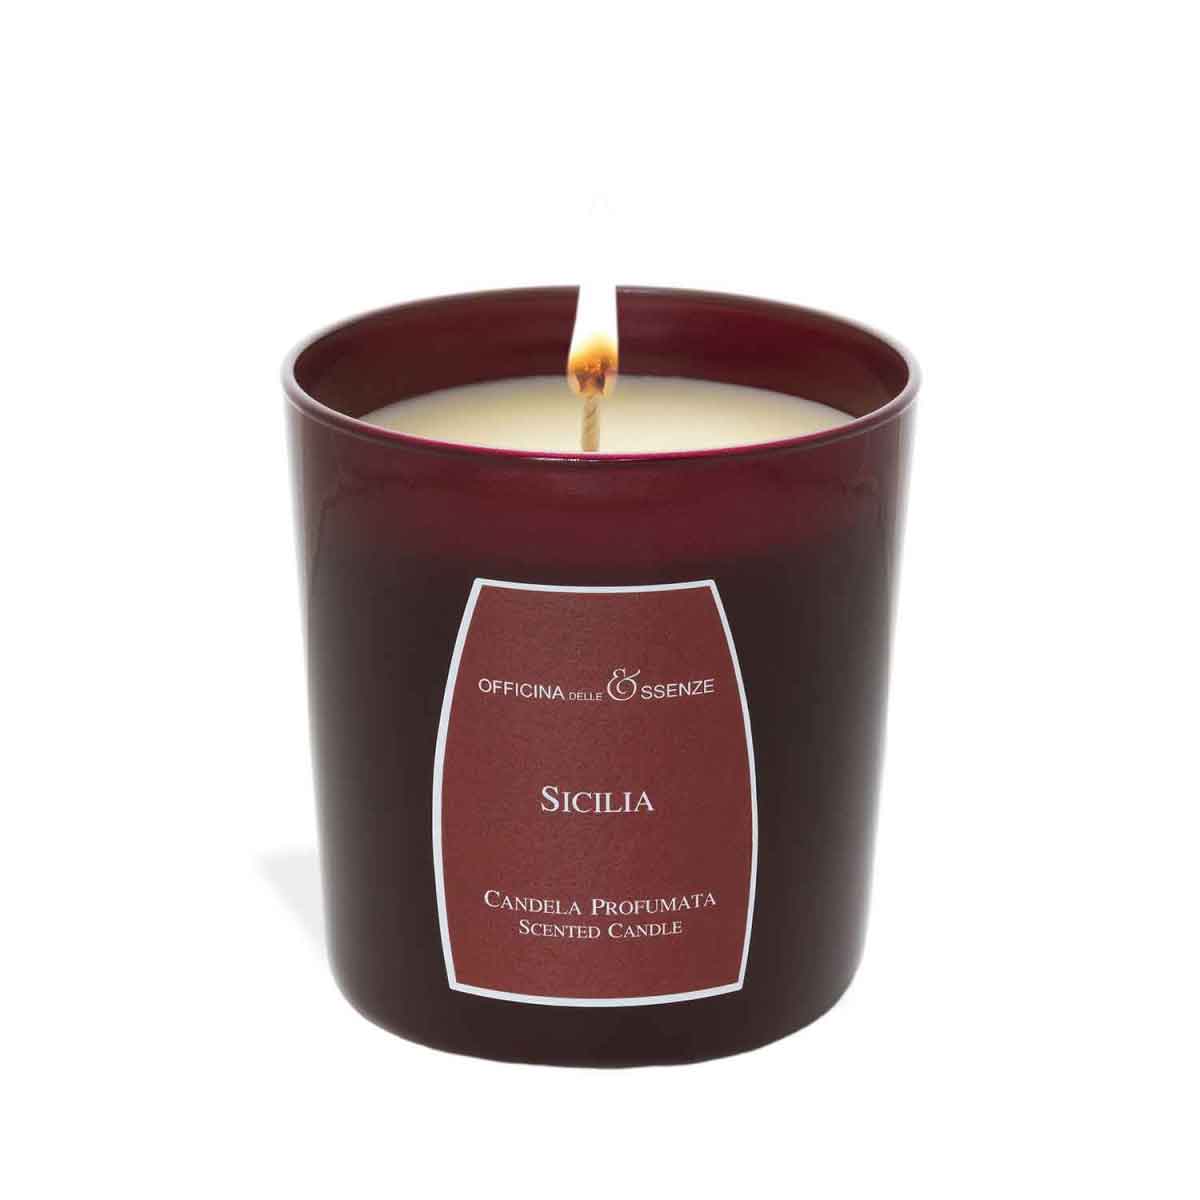 Sicily scented candle